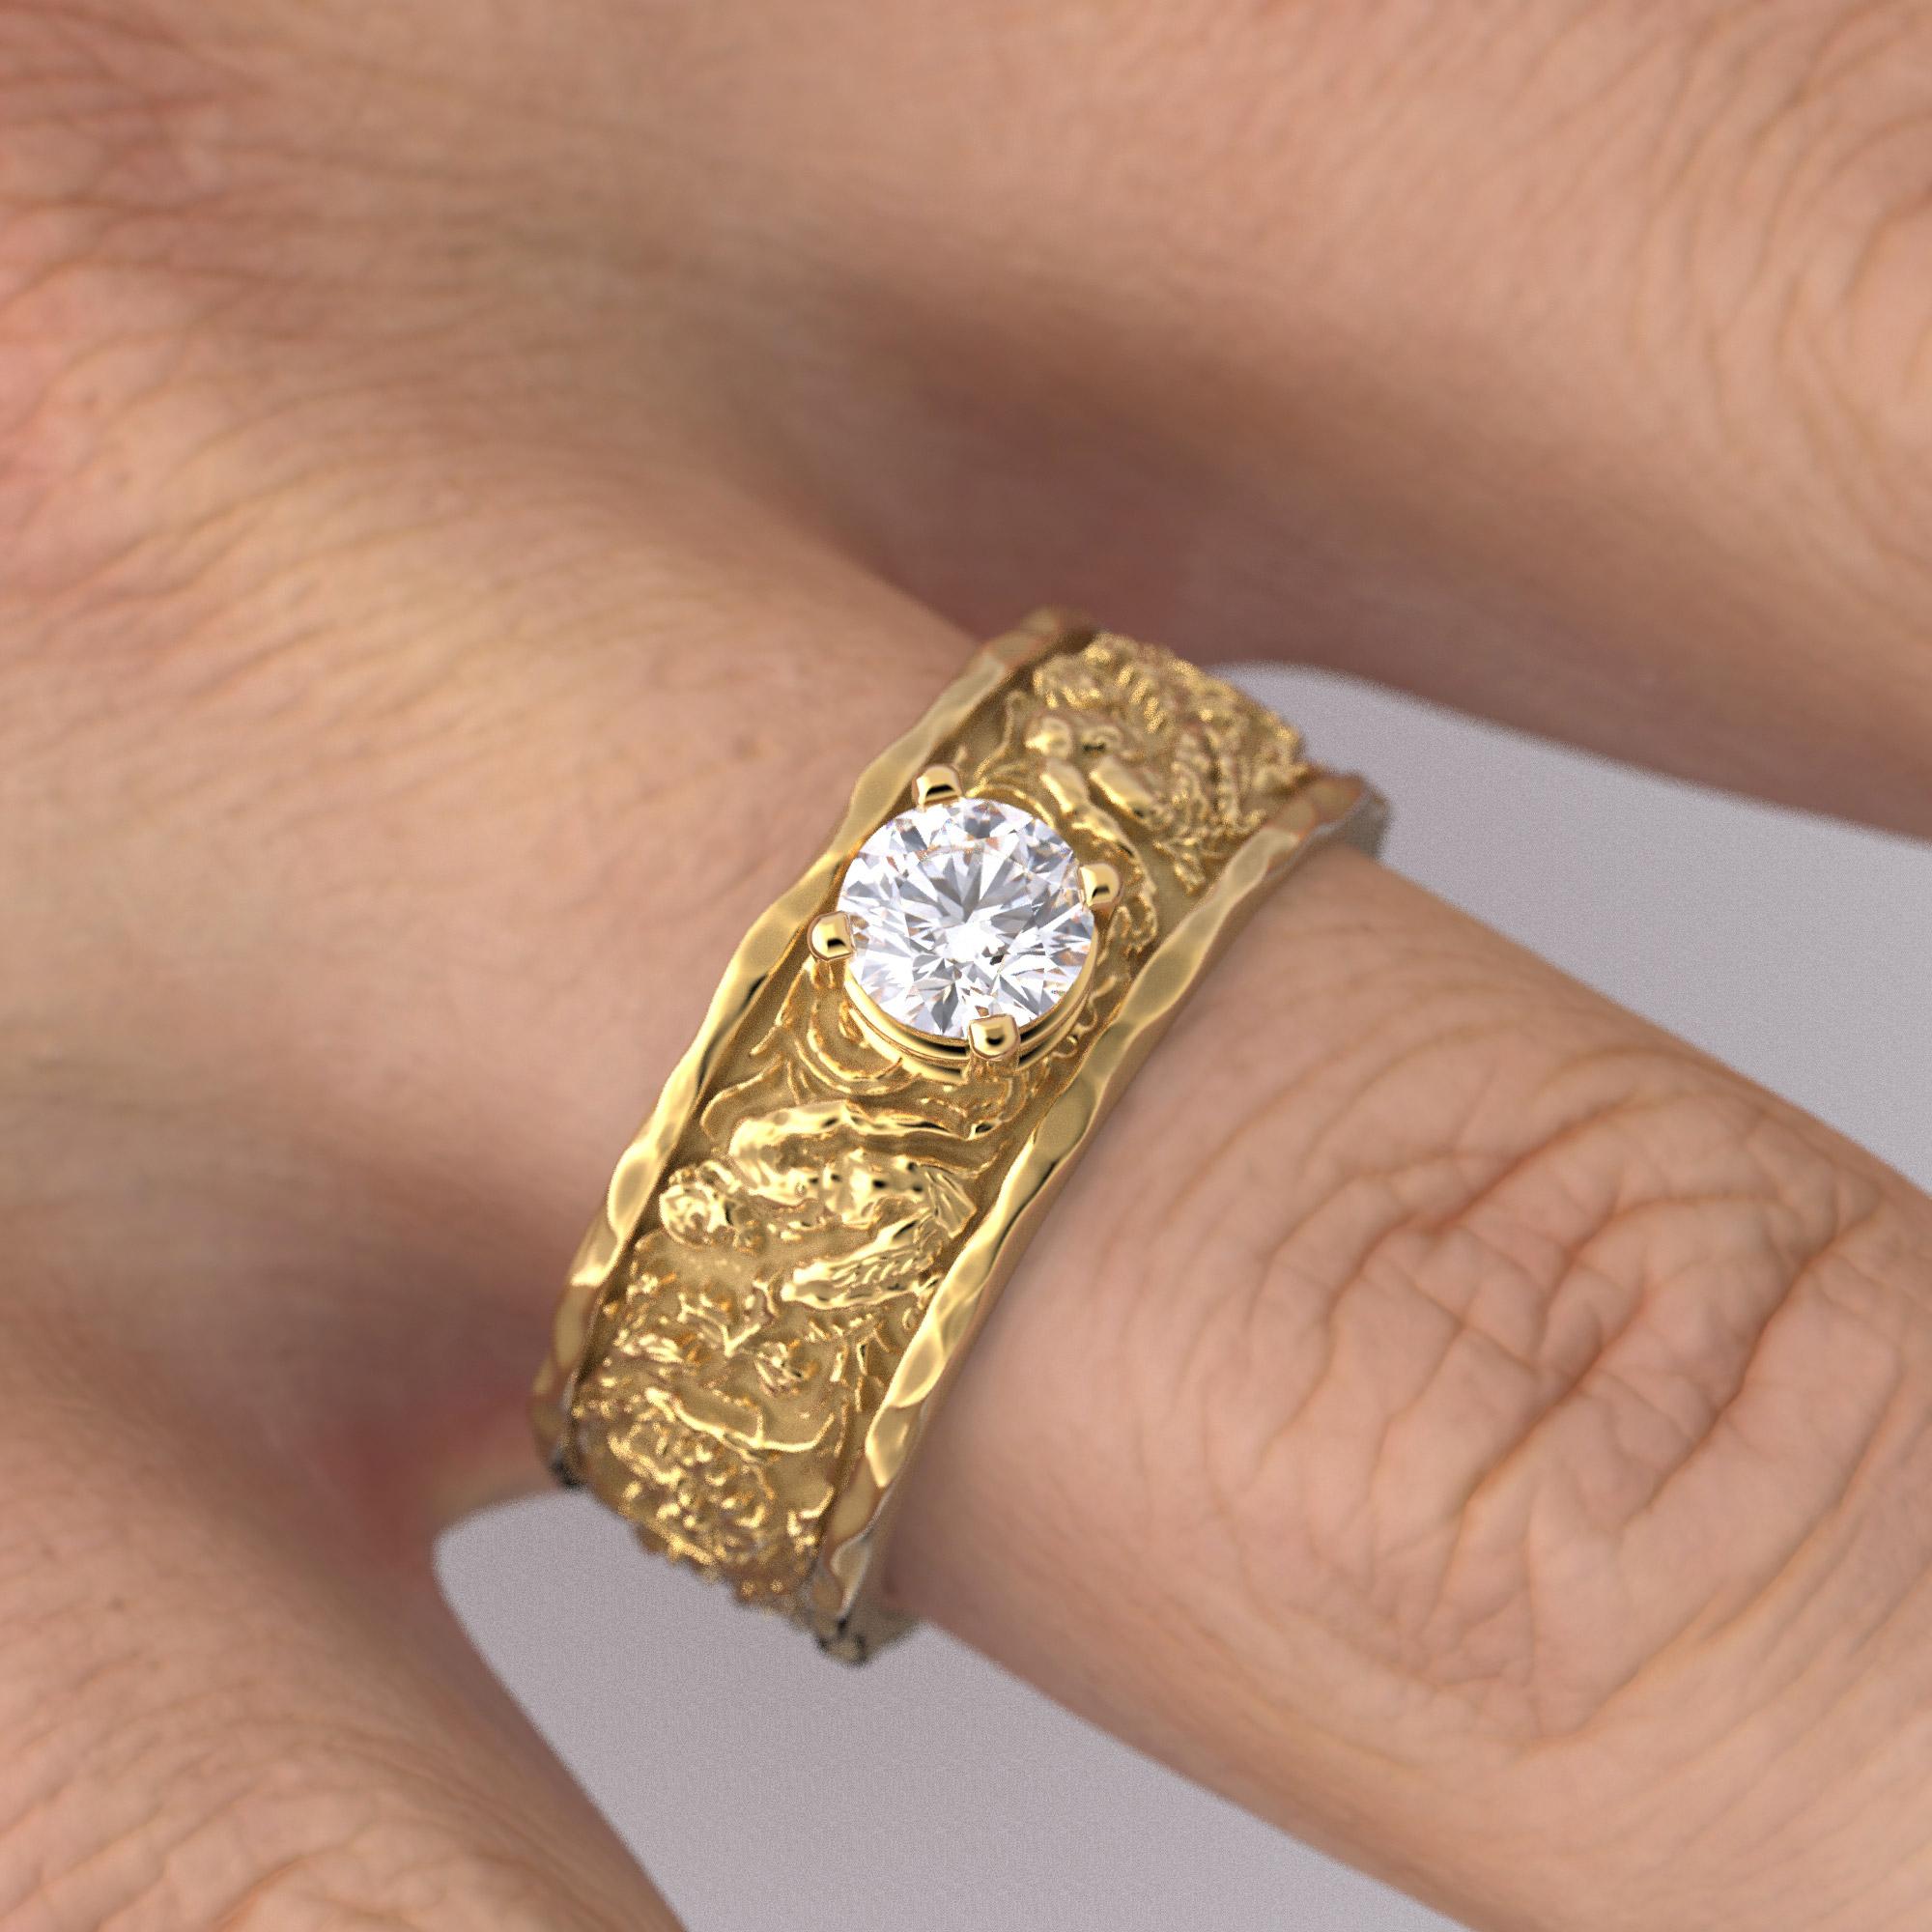 For Sale:  Half Carat Diamond Men's Gold Band in 14k Gold, Designed and Crafted in Italy 8